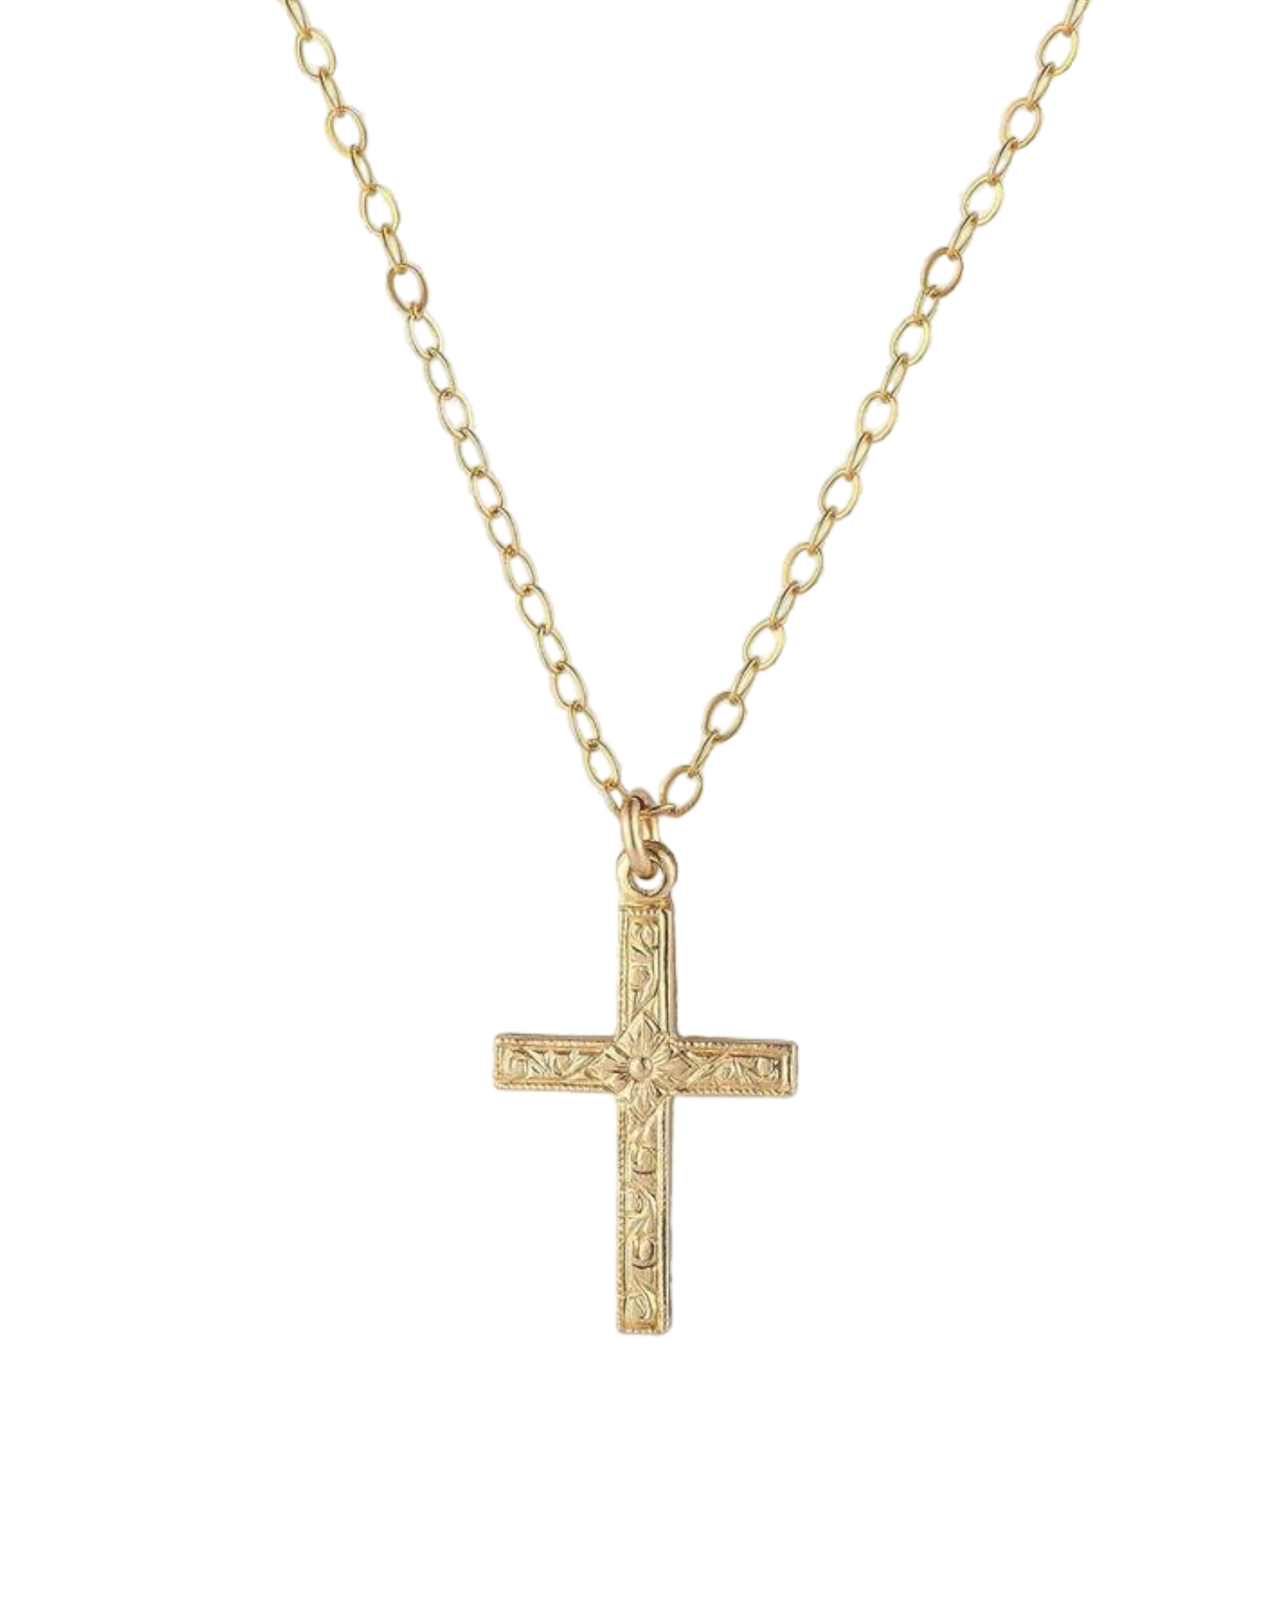 Small Vintage Carved Cross Necklace In 14K Gold Filled